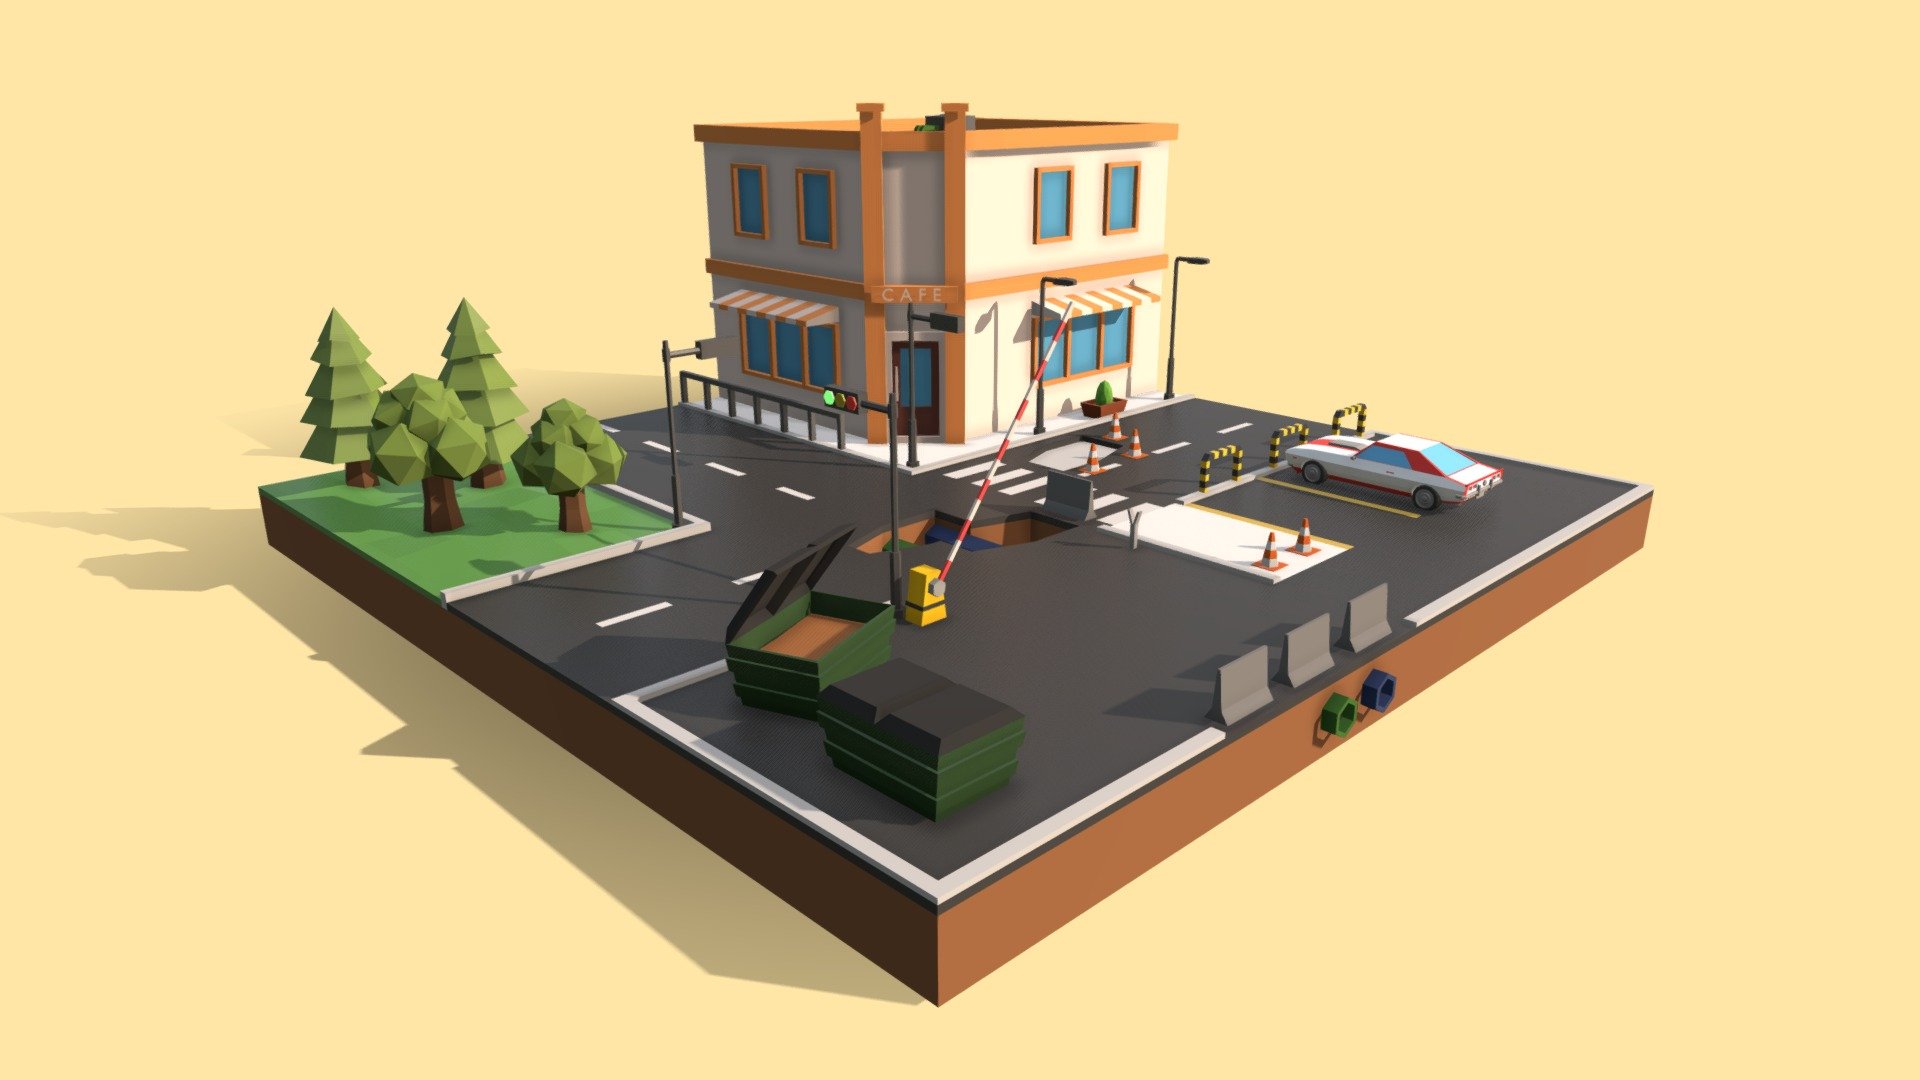 Small low poly-style diorama scene showing a crossroads with traffic lights, corner caffee shop, small park and parking lot with old muscle car parked. All in bright vivid colors - Low Poly City Diorama Scene - Download Free 3D model by Pongo115 3d model